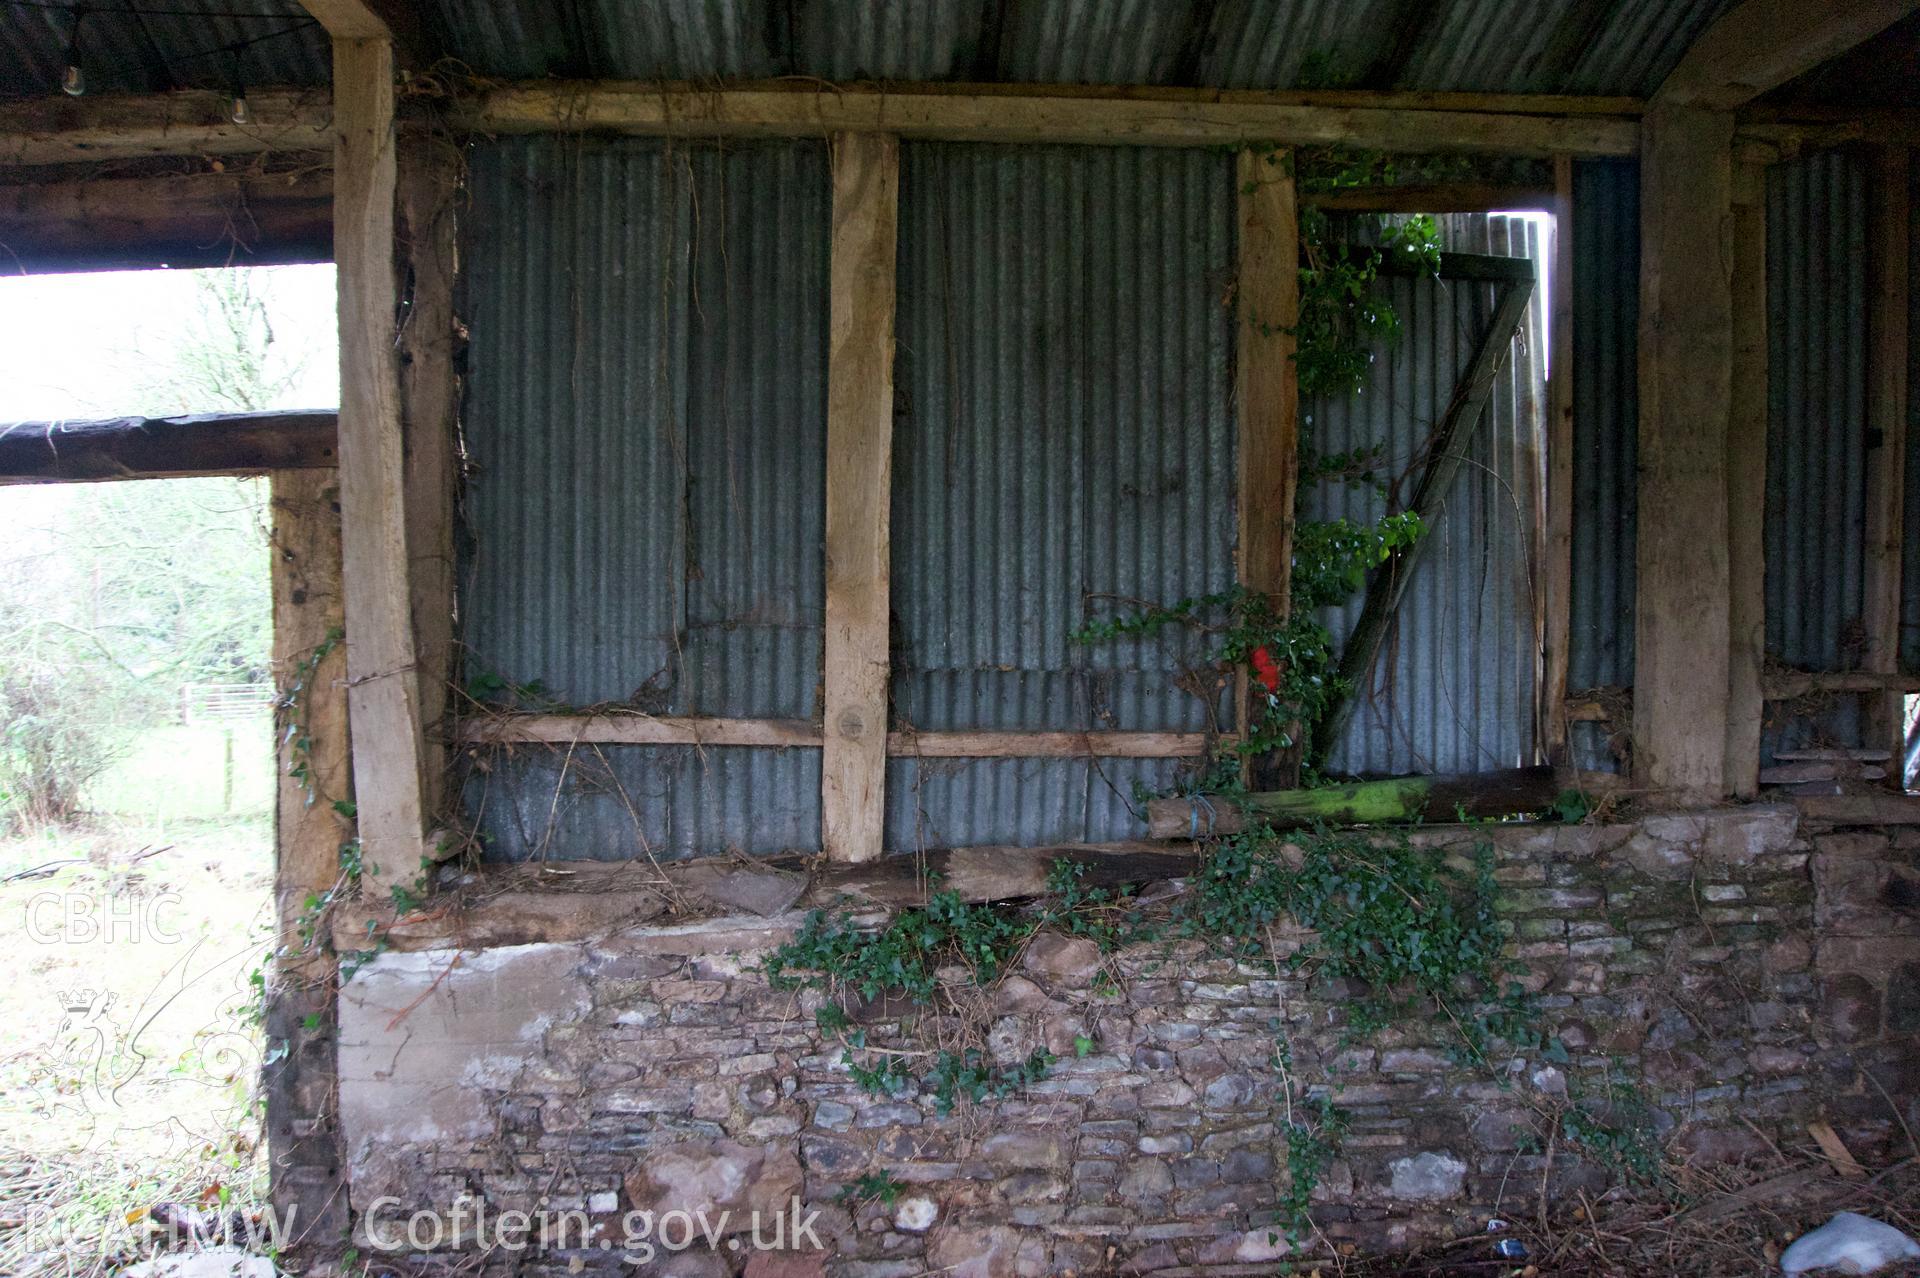 Inside of south wall, central bay, at Middle Ton Threshing Barn. Photographed for Historic Building Photographic Record of Middle Ton Threshing Barn, Llanvapley, by Dan Courtney of Cog Architects, 2019.